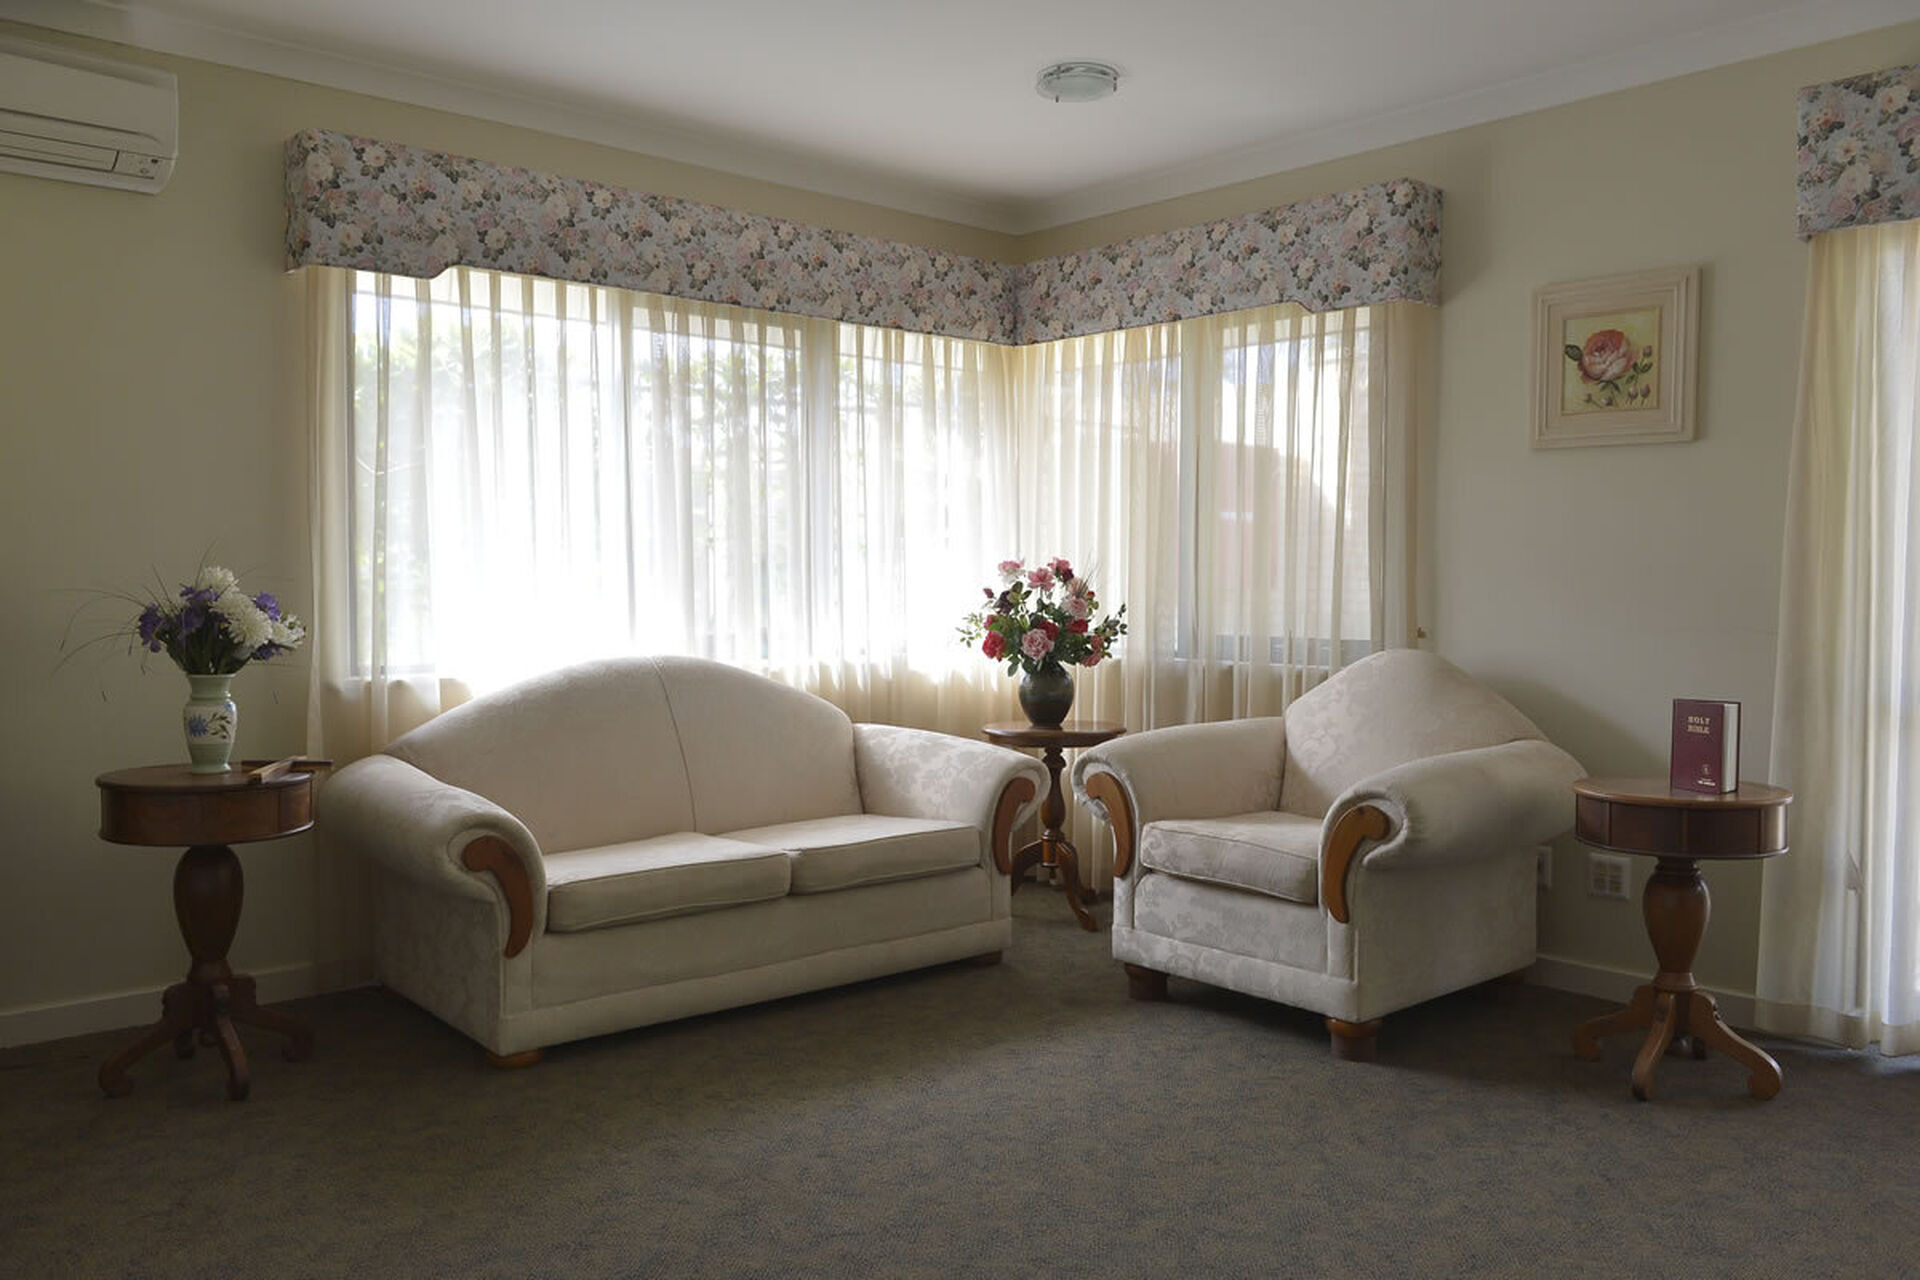 spacious sitting area for nursing home residents at baptistcare mirrambeena aged care home in margaret river wa